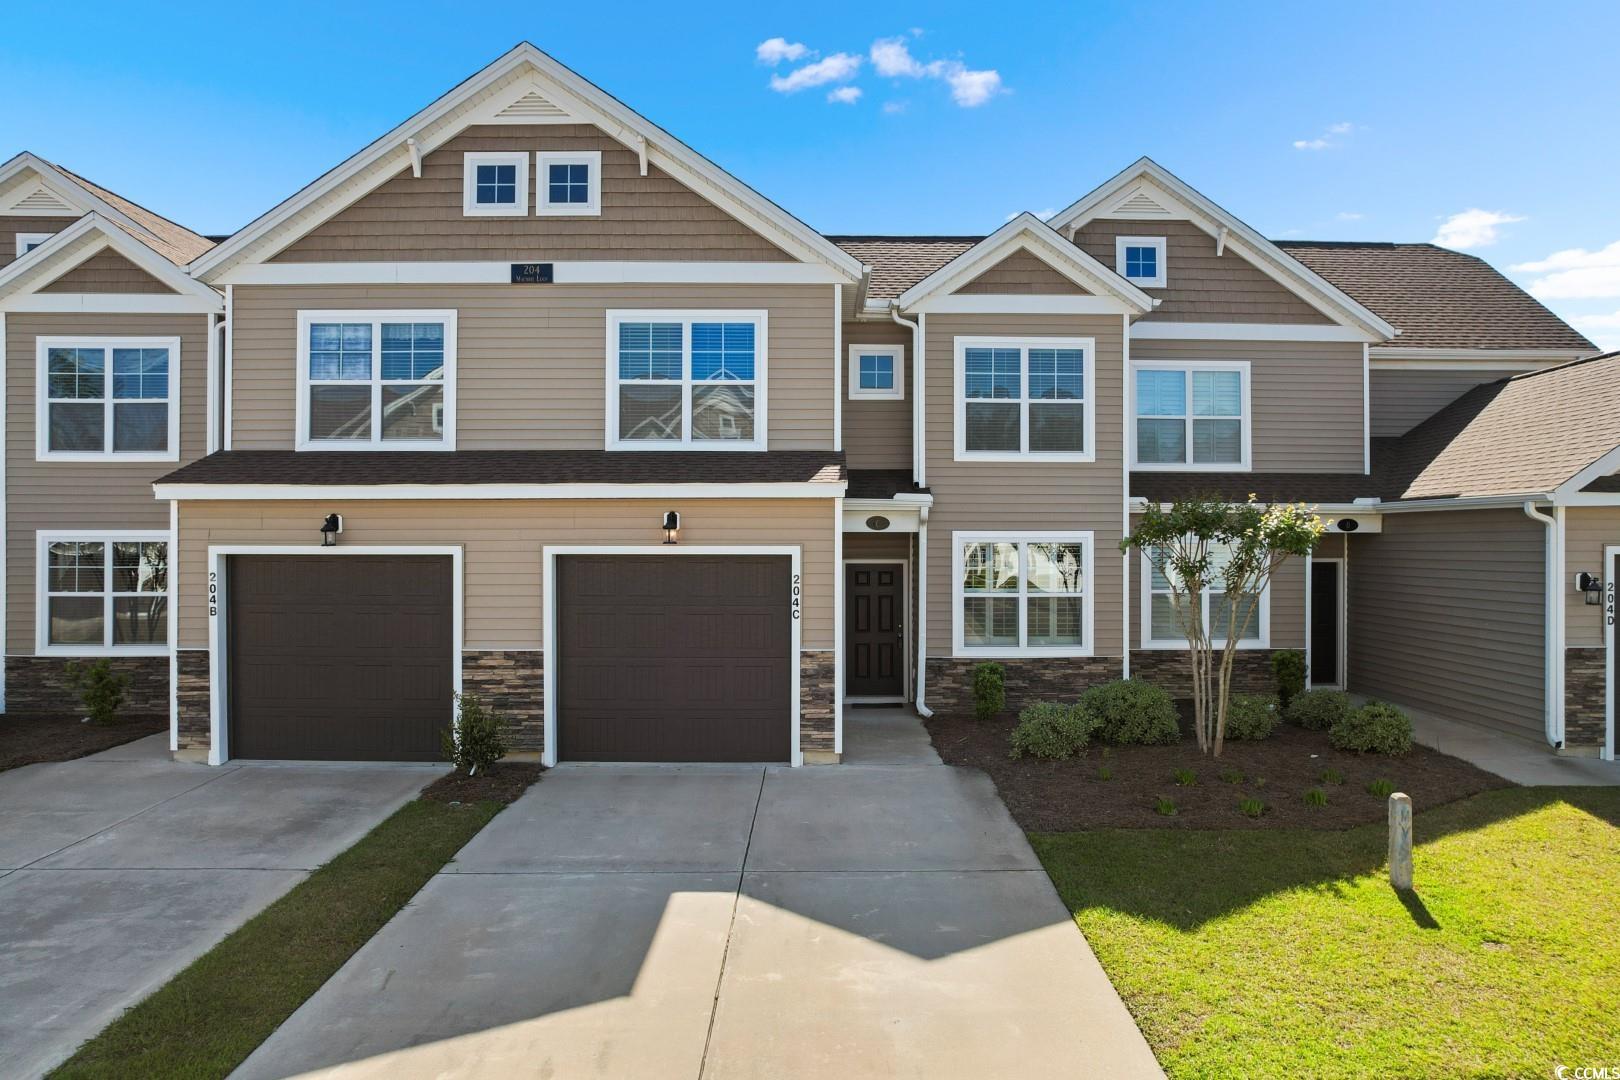 don't miss your opportunity to own this 3 bedroom, 2.5 bathroom townhouse style condo in the highly sought after community, berwick at windsor plantation. this unit features a spacious open floor plan of the main living areas, with tall vaulted ceilings and lvp flooring throughout the first floor. the kitchen is equipped with all stainless steel appliances, granite countertops, a work island, large breakfast bar, and pantry for extra storage. each bedroom includes plenty of closet space and easy access to a bathroom, while the master also features tray ceilings, double sink vanities and a large walk in closet! a loft at the top of the stairs makes the perfect playroom, office, or additional living space- the options are endless! enjoy afternoons relaxing on the screened in porch or grilling on the extended concrete patio, all with a quiet wooded view and privacy fencing on either side to separate from the neighbors. berwick offers a community pool & clubhouse, and is perfectly situated close to grocery stores, schools, shopping, dining, and just a short drive to the beach. you won't want to miss this. schedule your showing today!